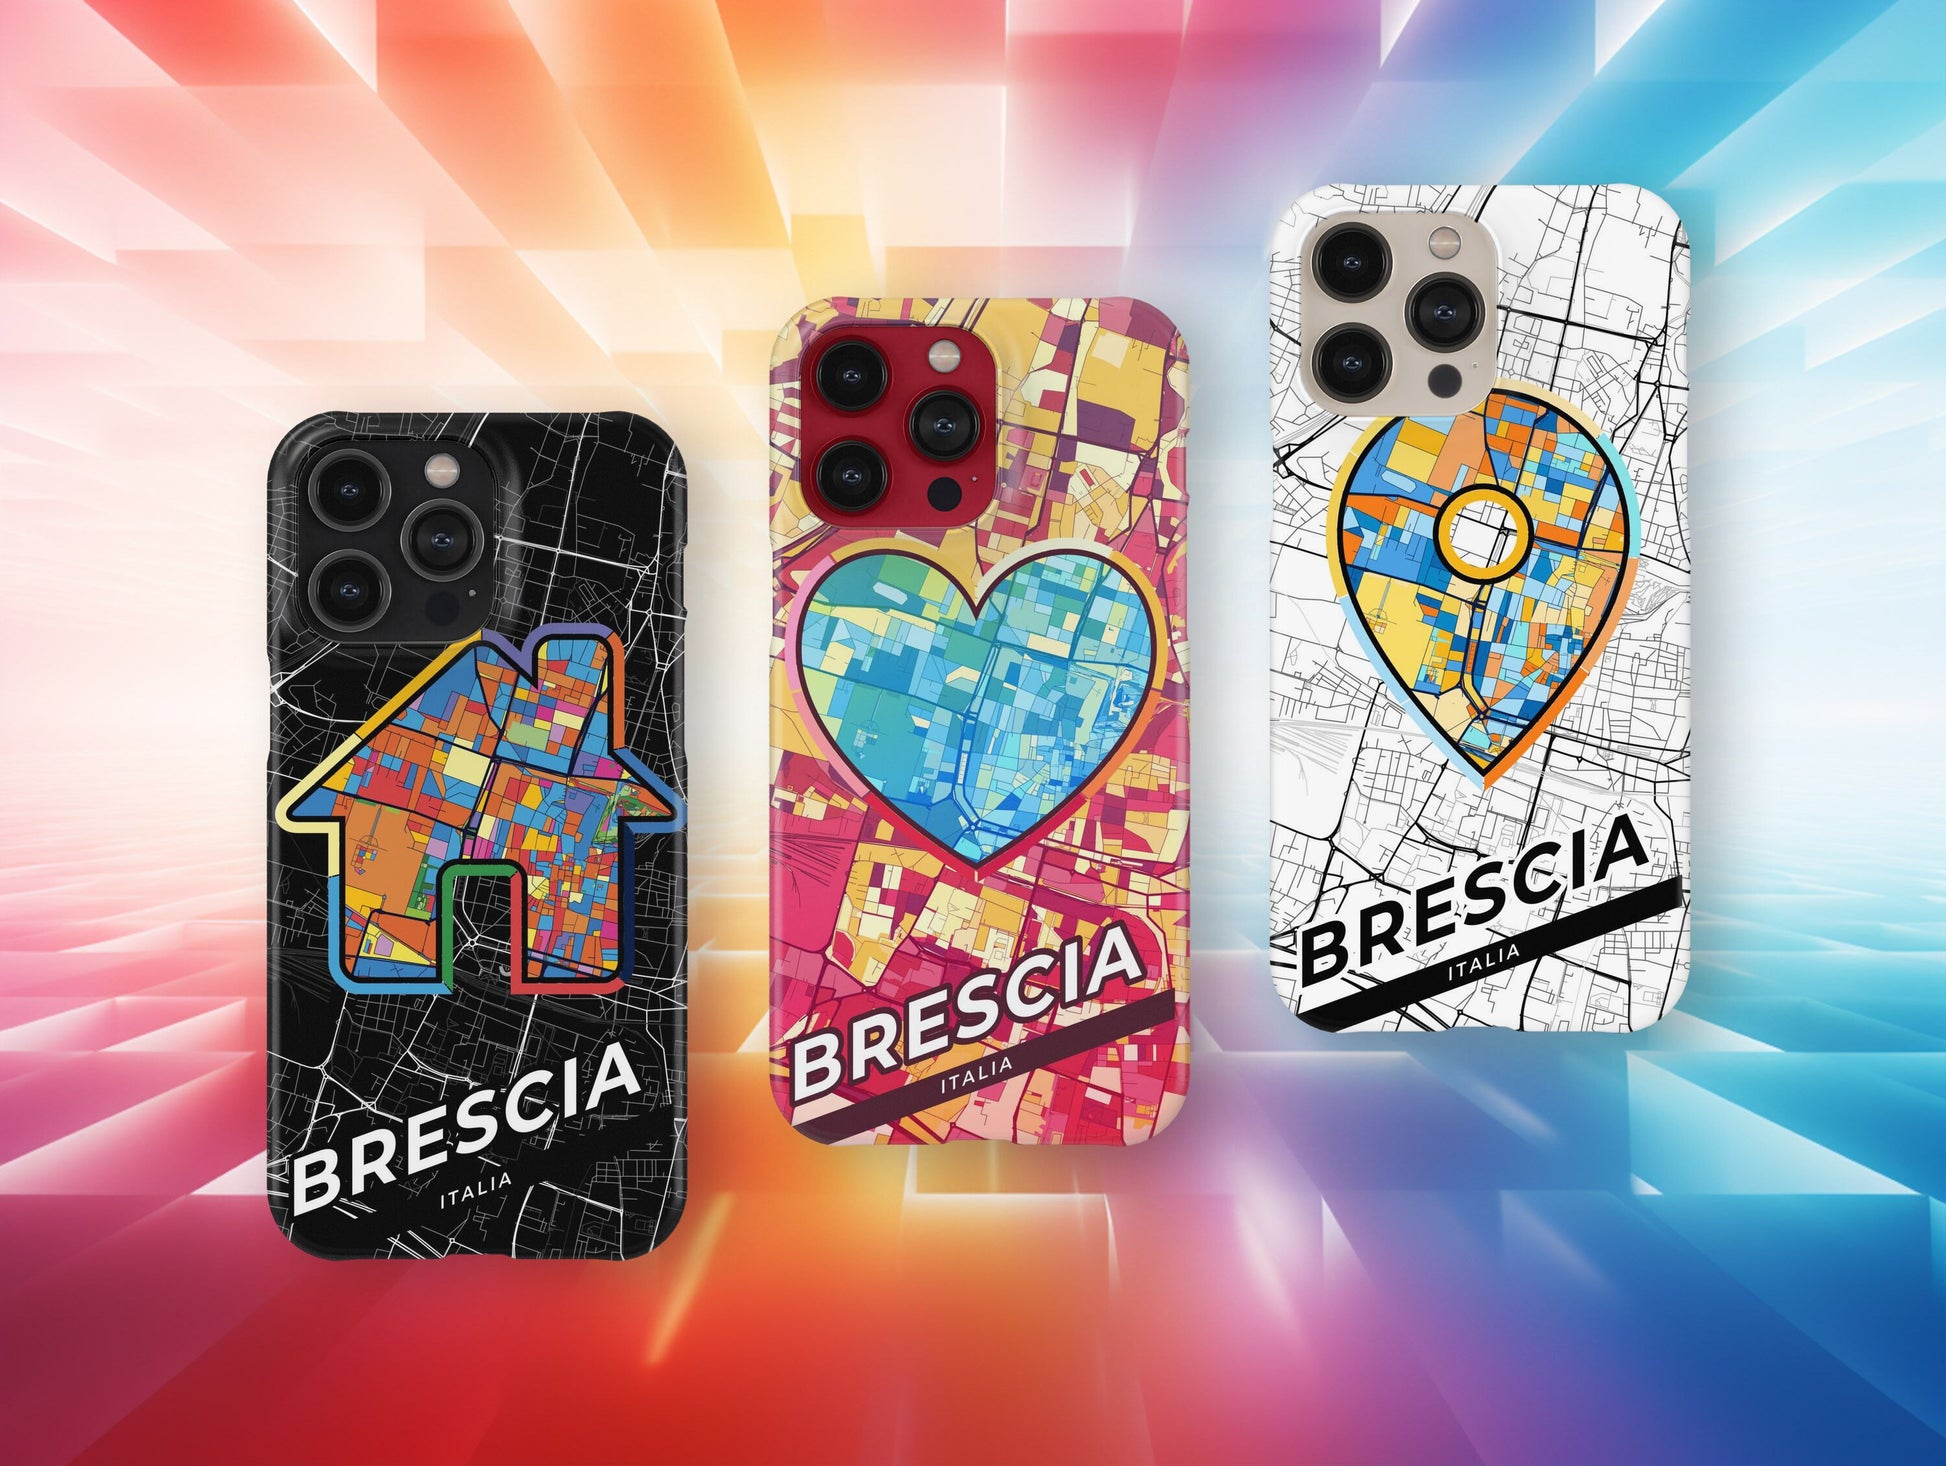 Brescia Italy slim phone case with colorful icon. Birthday, wedding or housewarming gift. Couple match cases.